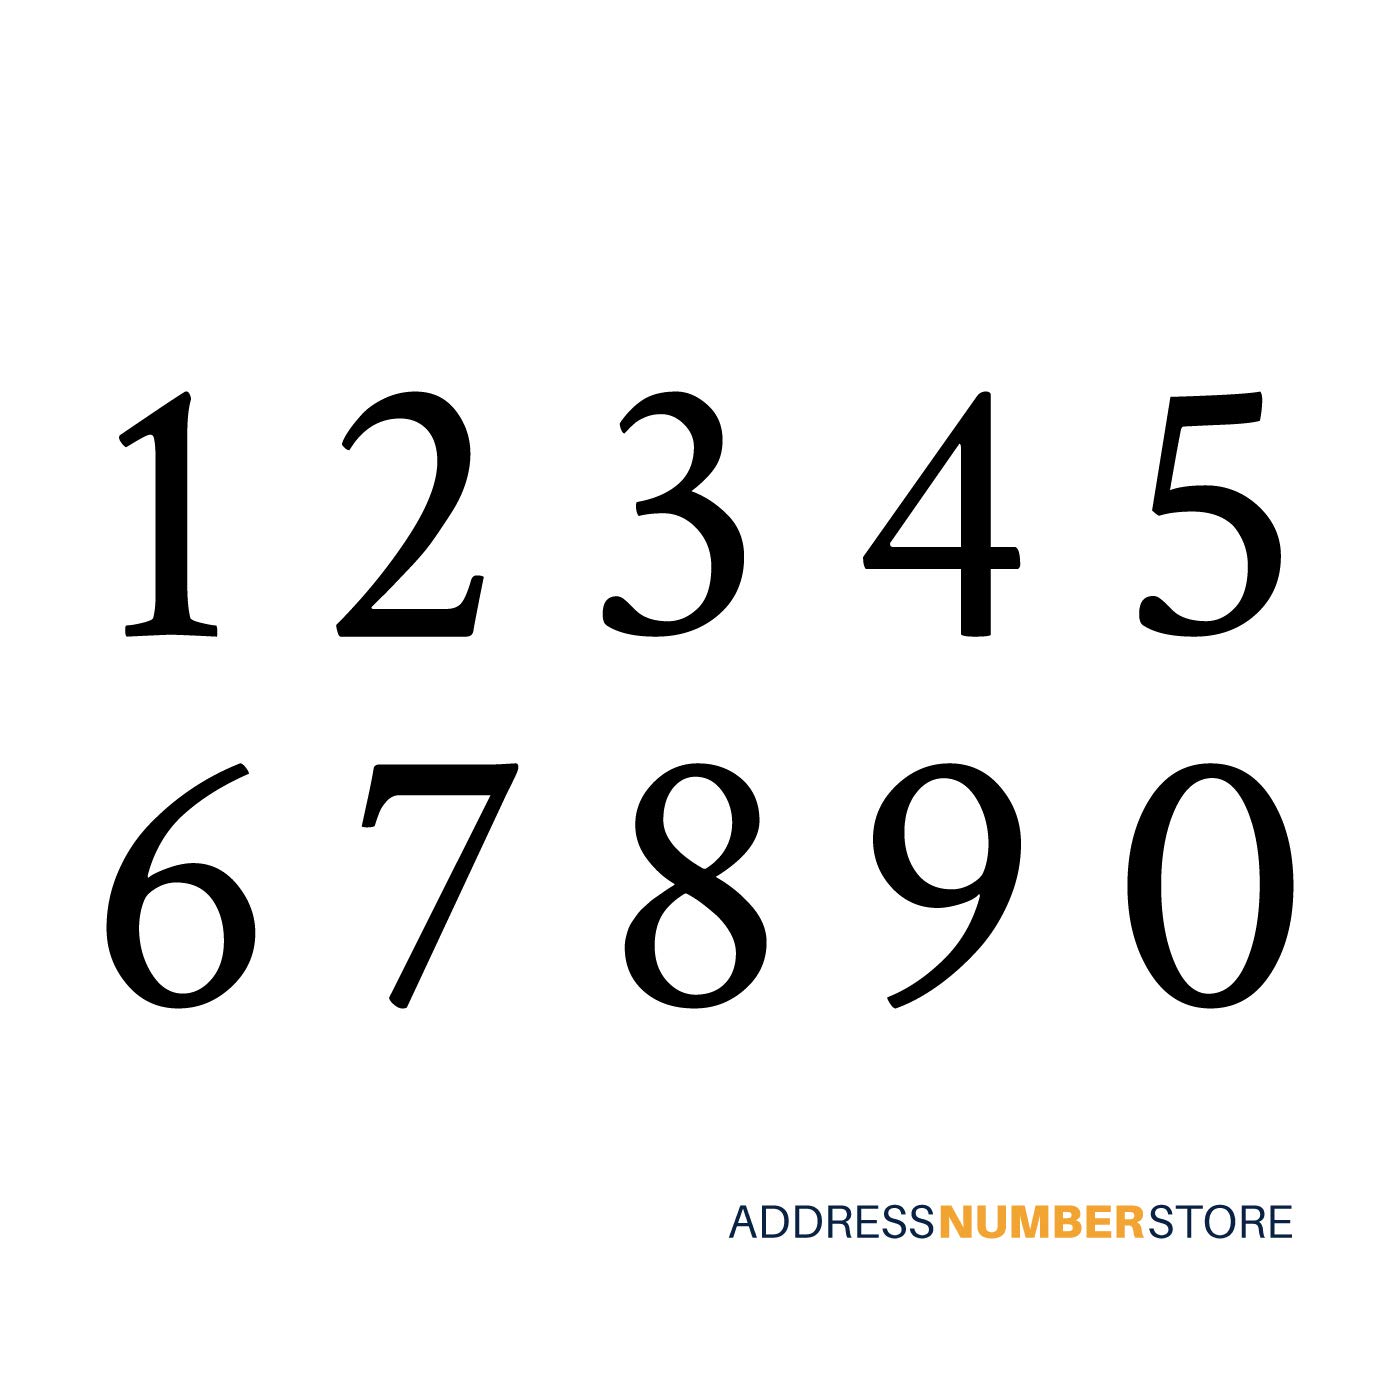 Address Number Store, Powder Coated Soft Arch Economy Series Address Plaque with Lawn Stakes, Serif Font, Holds up to 5 Characters